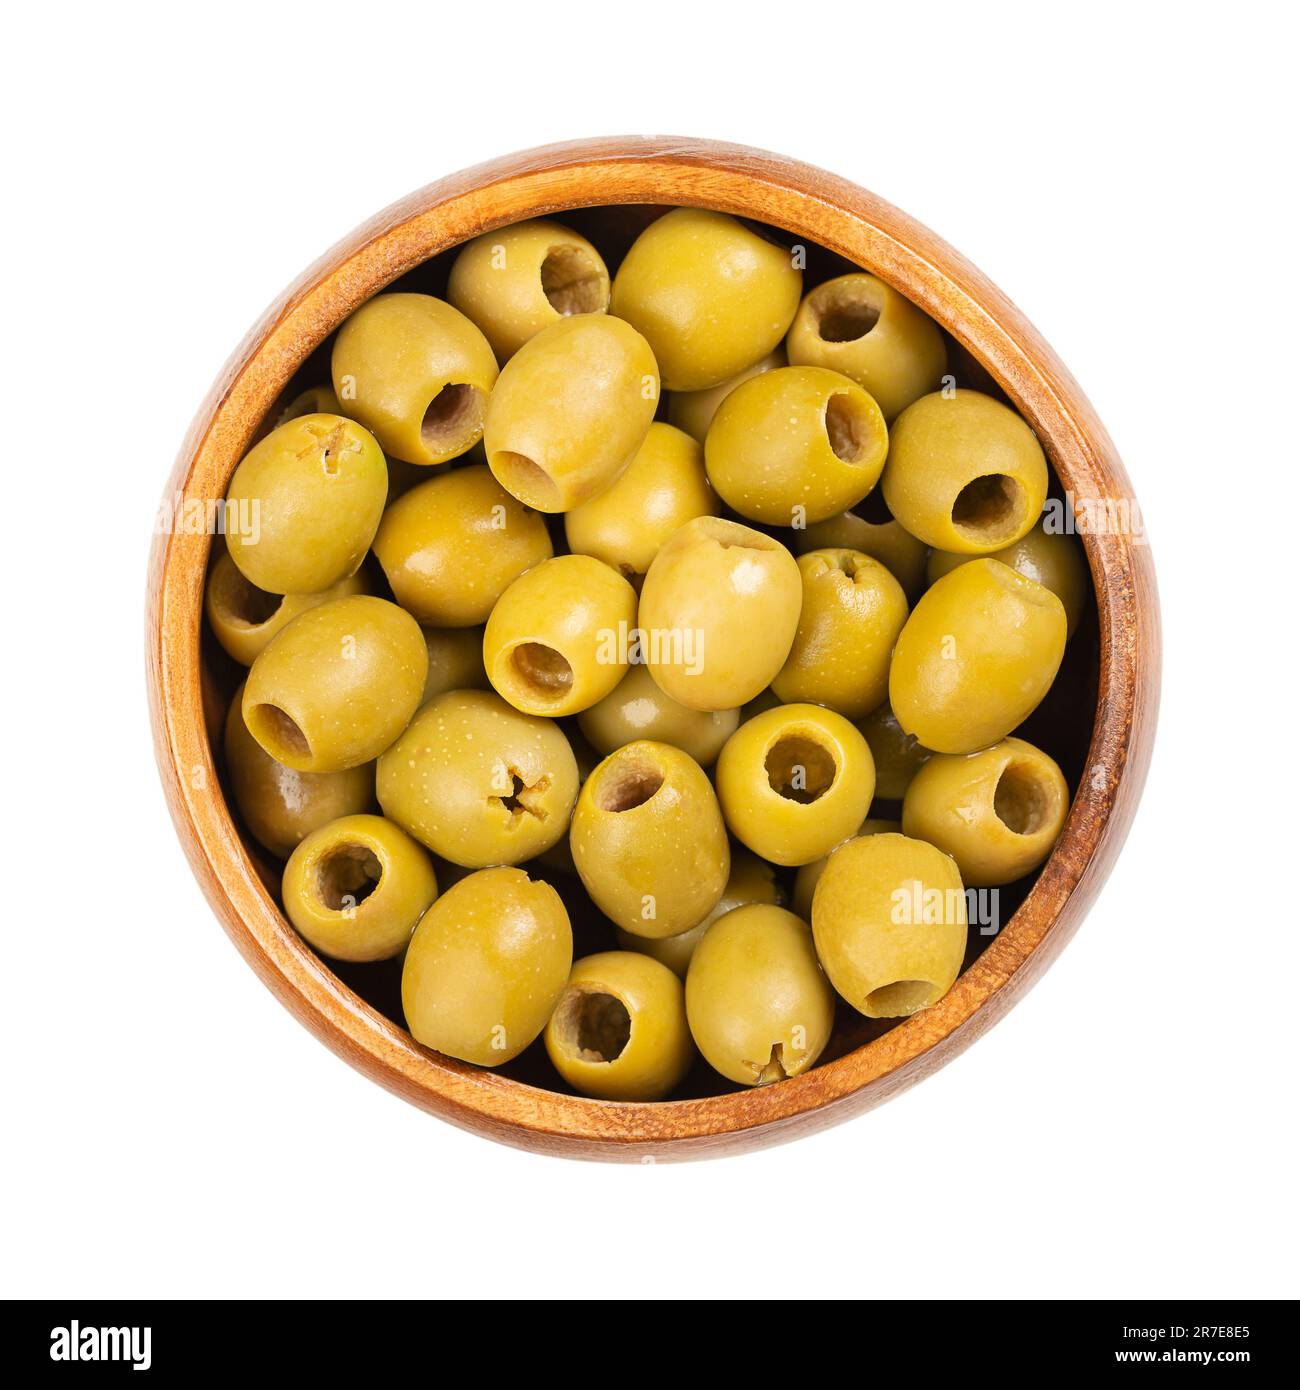 https://c8.alamy.com/comp/2R7E8E5/pitted-green-olives-for-snacking-in-a-wooden-bowl-ready-to-eat-small-table-olives-from-spain-processed-after-kernel-removing-preserved-in-brine-2R7E8E5.jpg